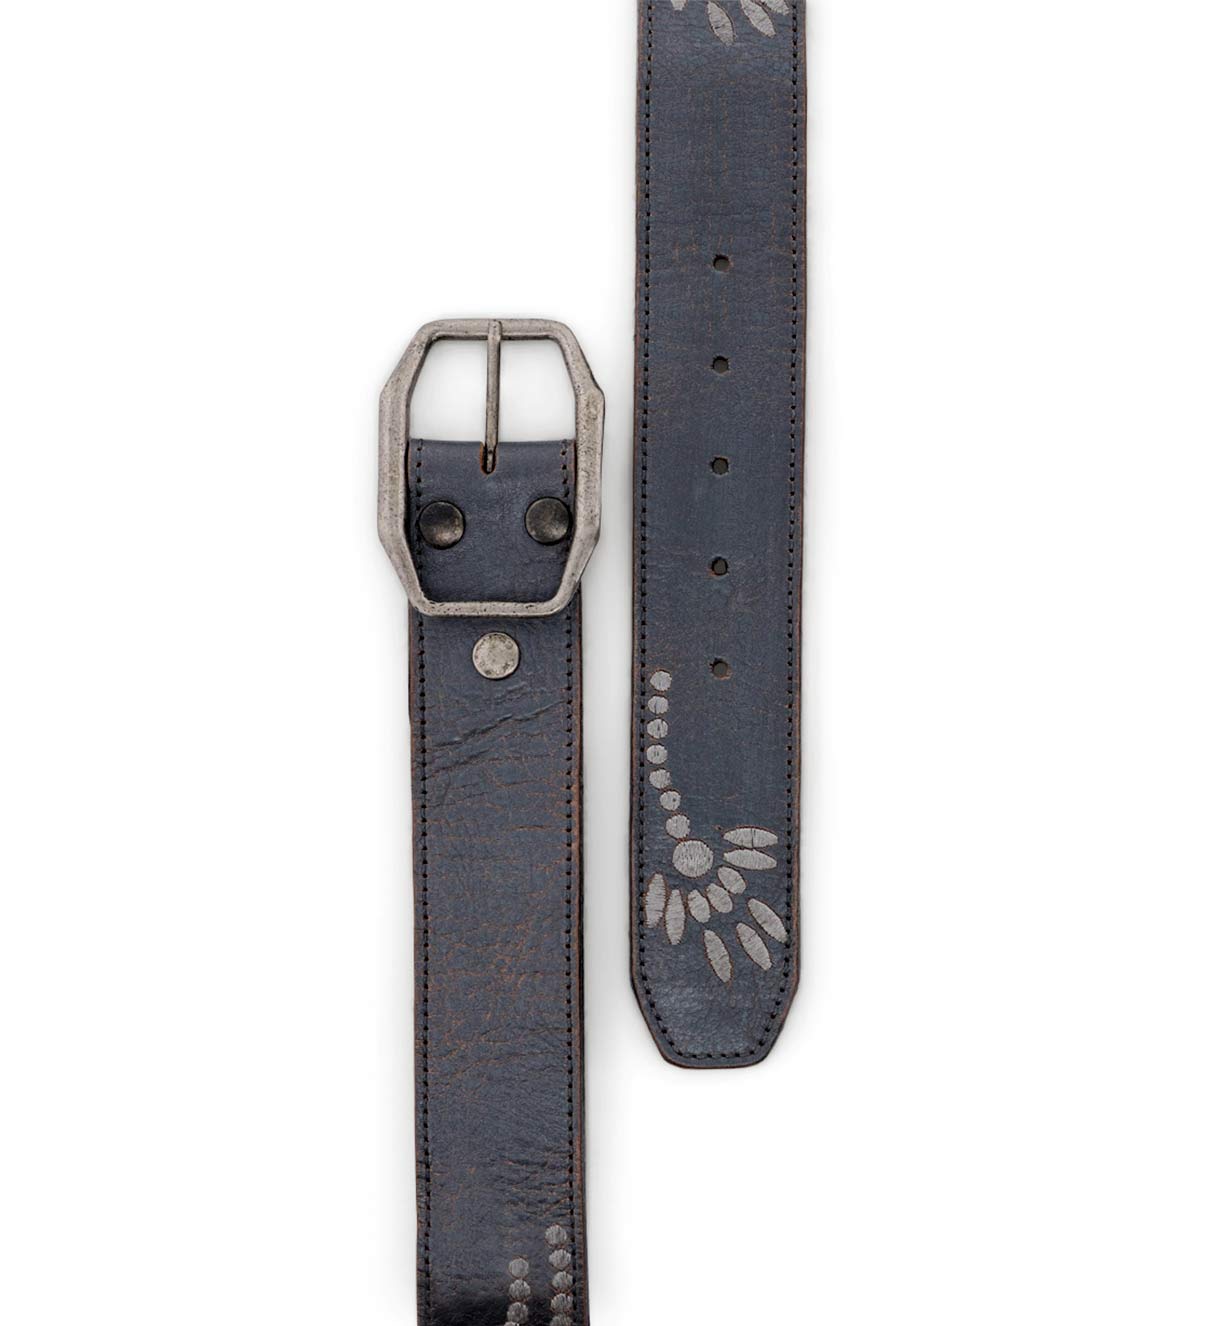 A Mohawk belt with a silver buckle by Bed Stu.